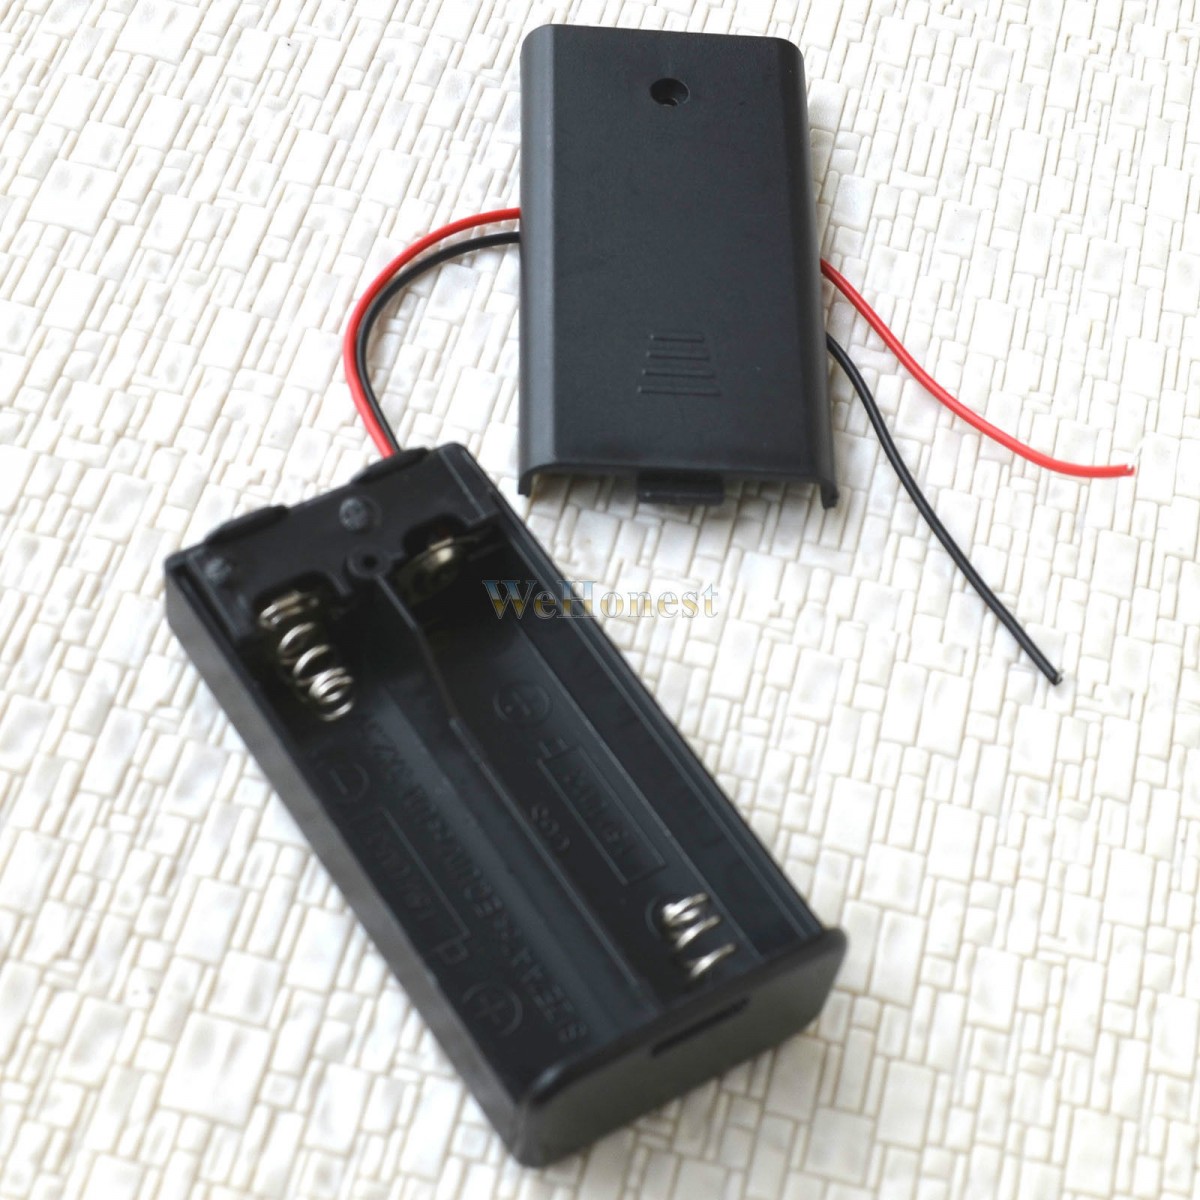 2 x  Batteries Holders to Drive the LEDs lampposts or signals without resistors